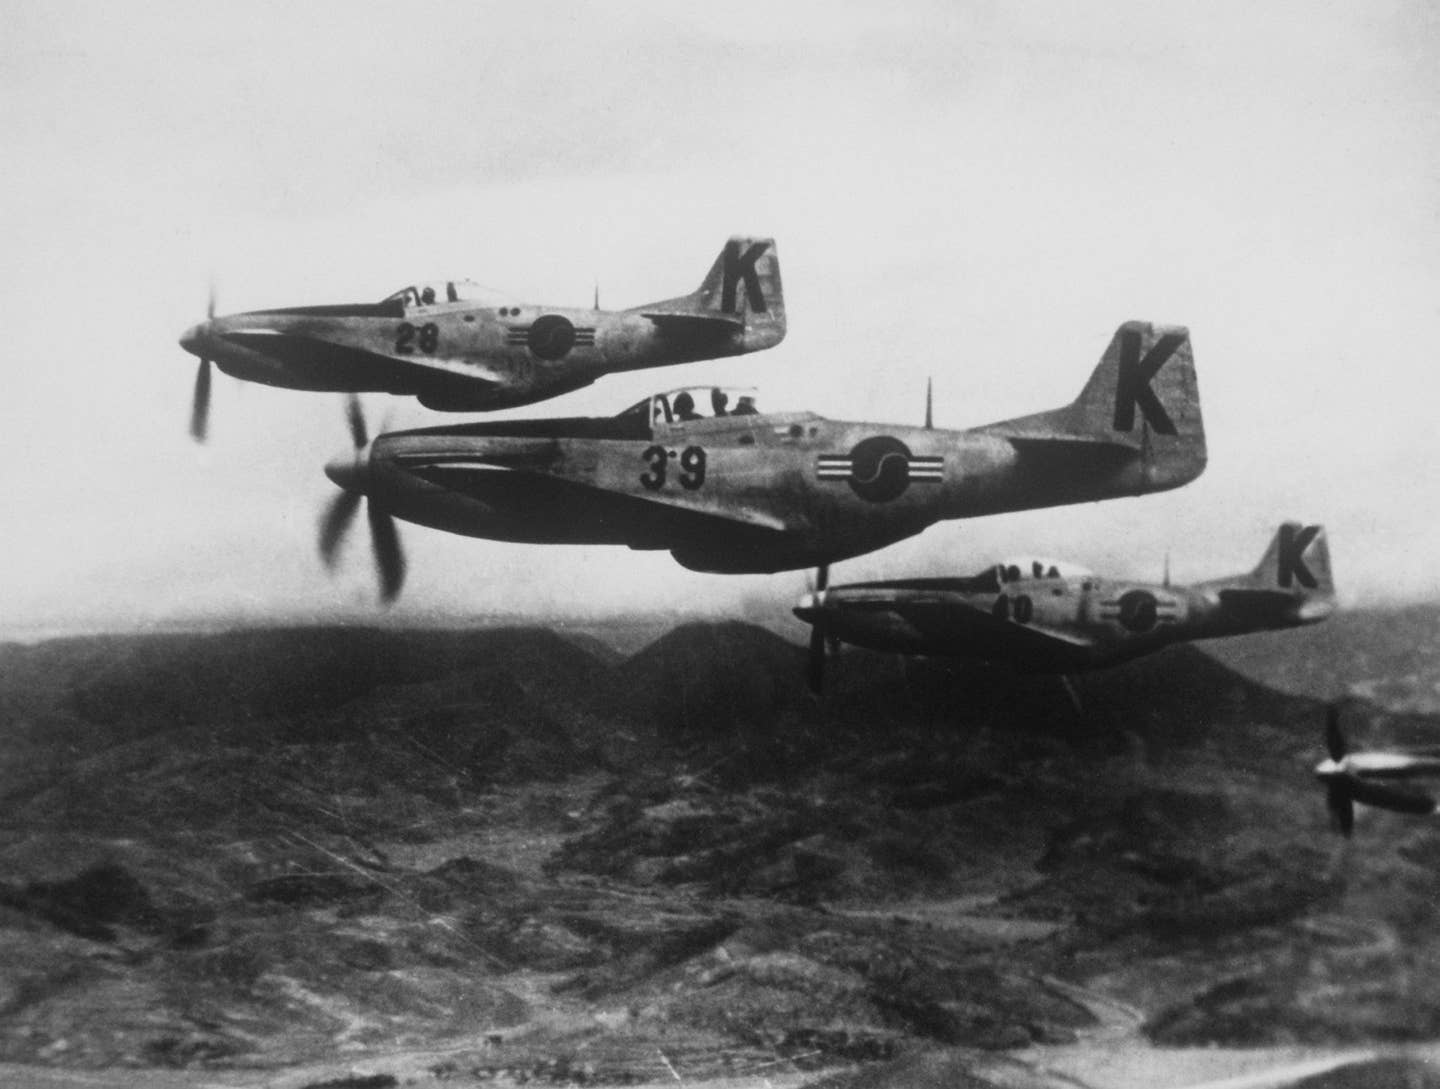 South Korean <a href="https://www.wearethemighty.com/popular/p-47-thunderbolt-versus-p-51-mustang-which-legend-wins/" target="_blank" rel="noreferrer noopener">P-51 Mustangs</a>. (Air and Space Museum)